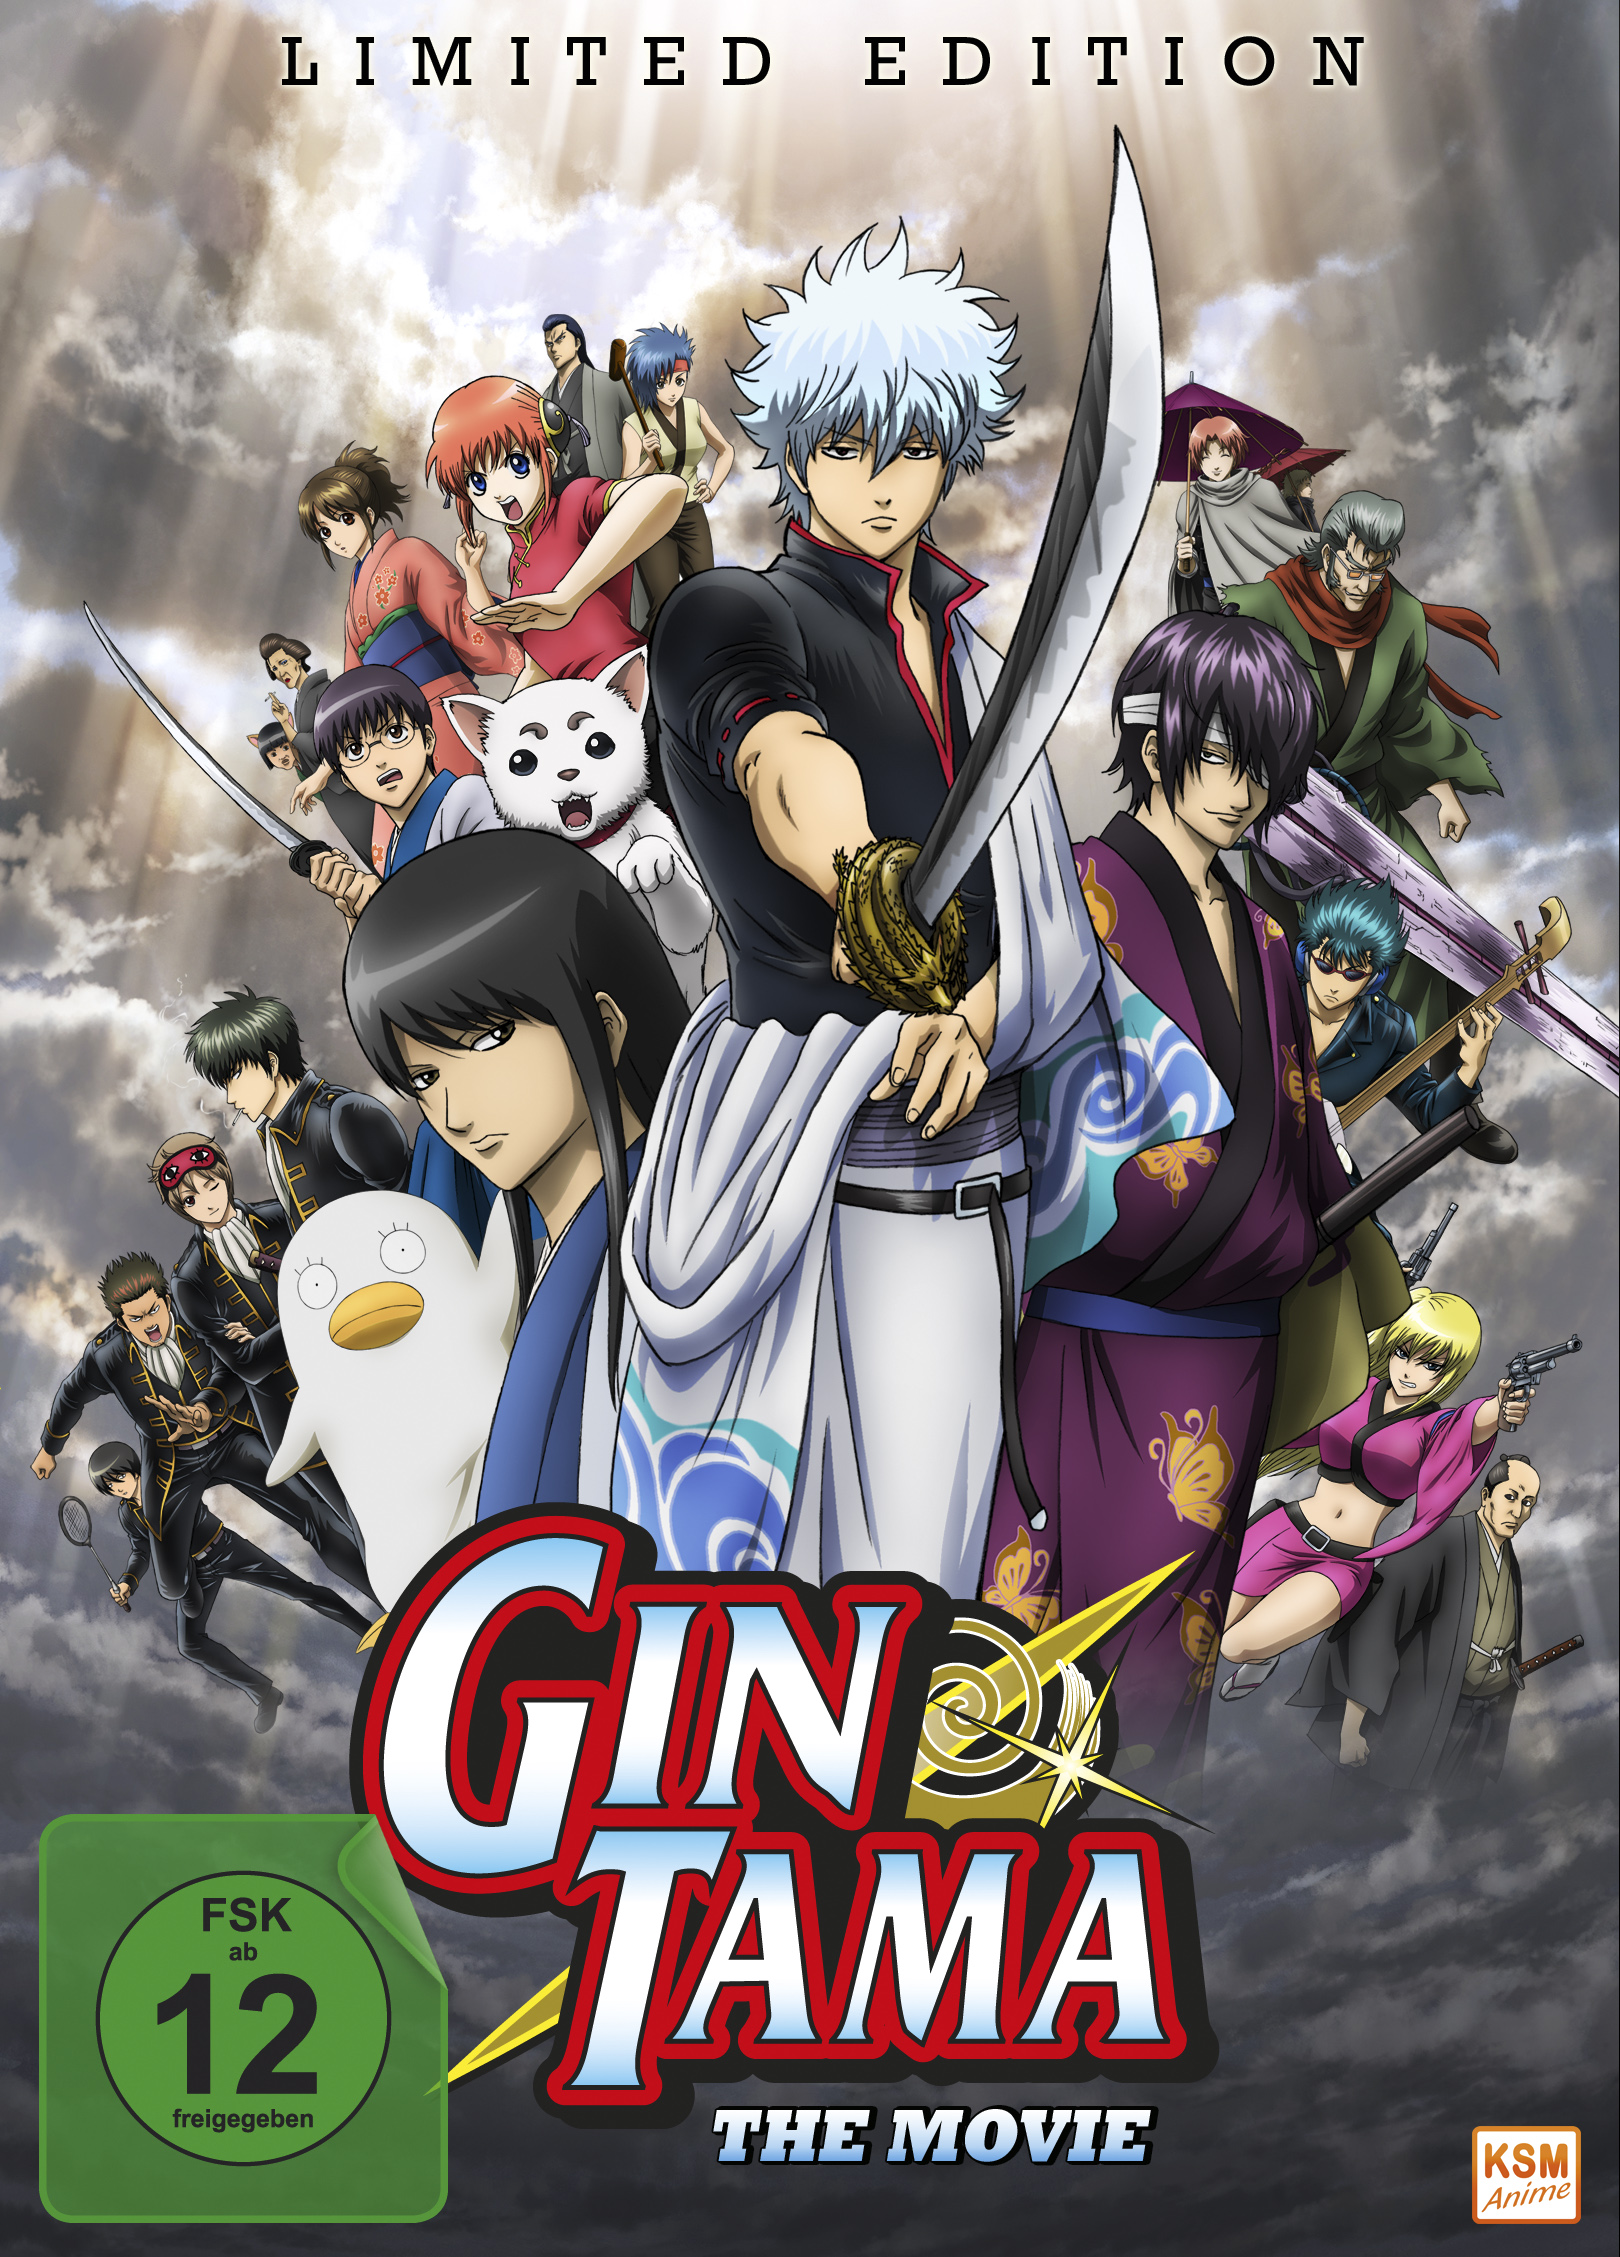 Gintama - The Movie 1 - Limited Edition [DVD]